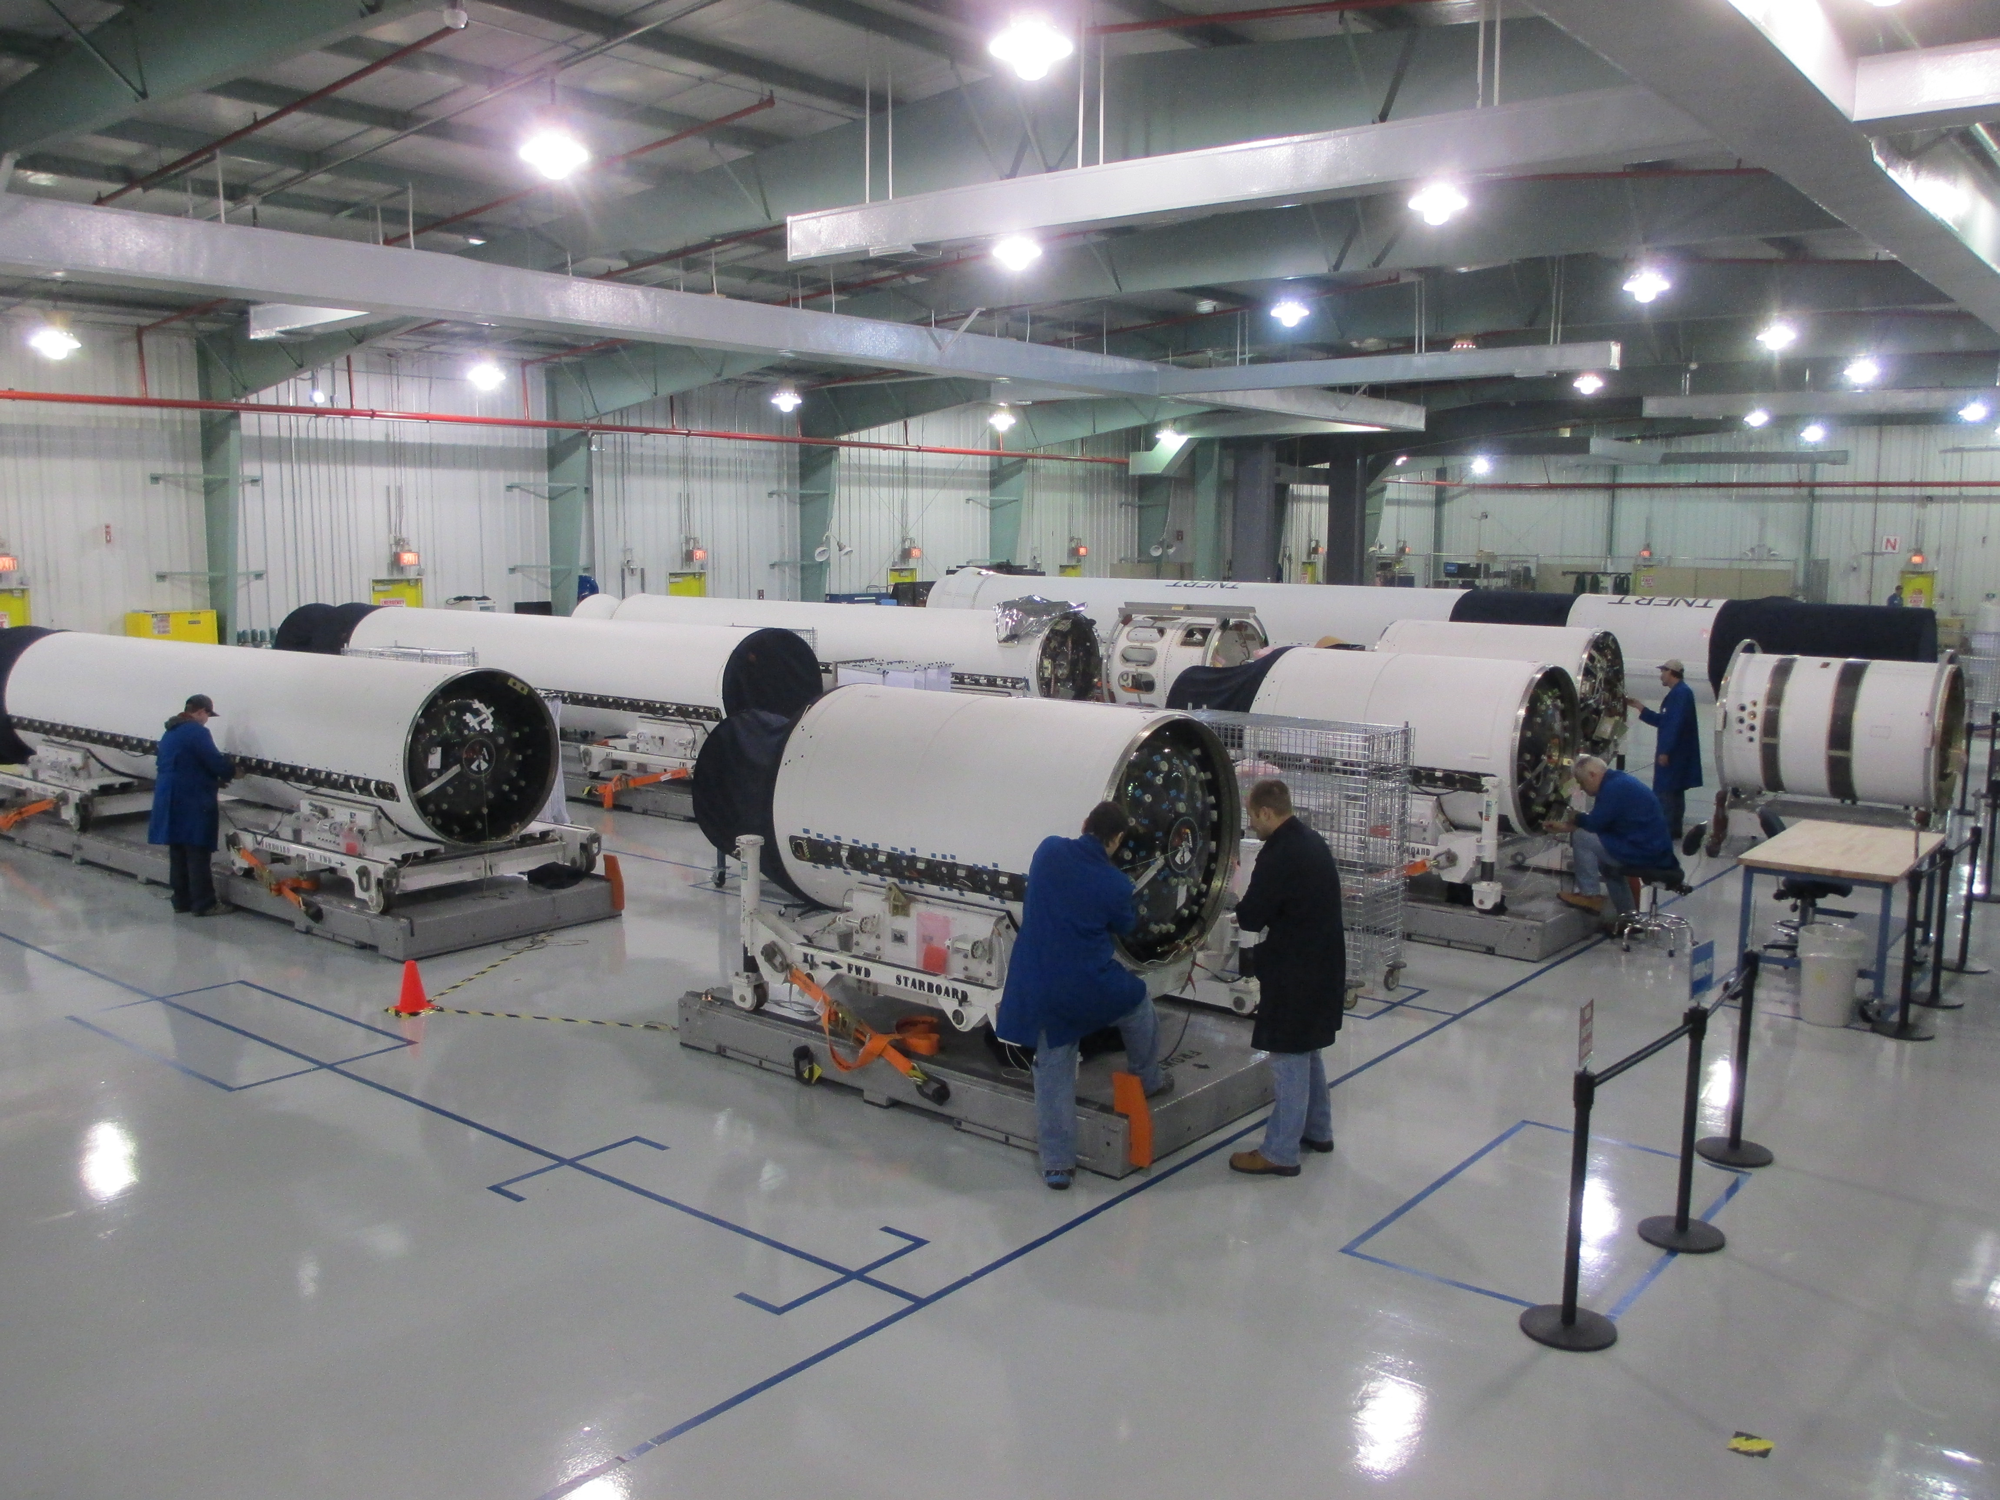 Employees in Facility wearing lab coats and working on large sections of rockets.